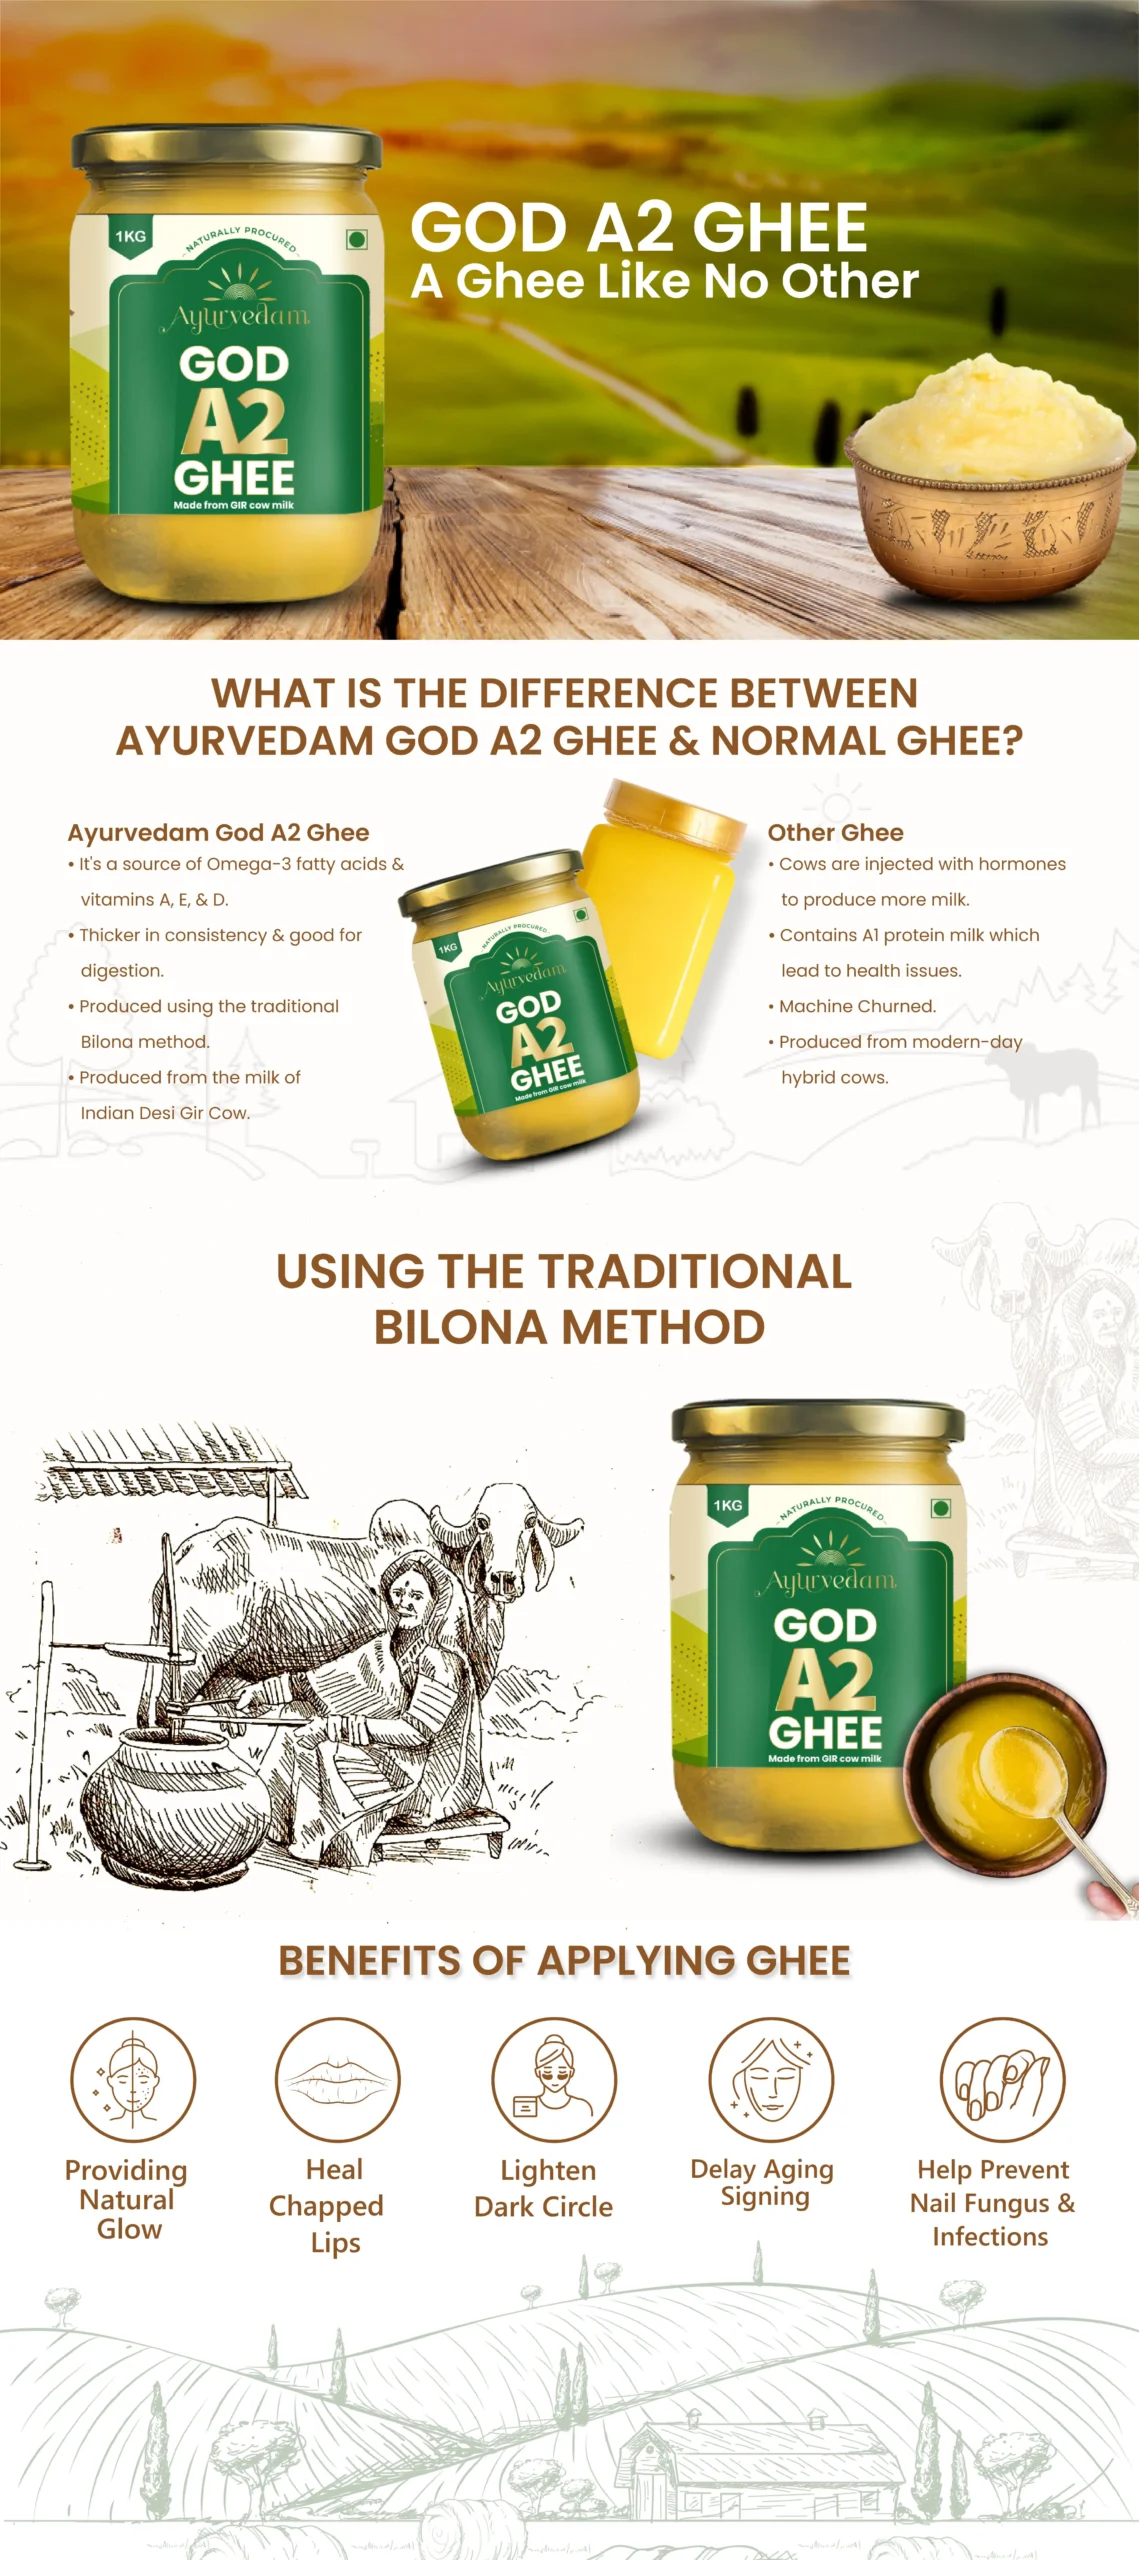 Web banner of Ayurvedam’s God A2 Ghee, showcasing its numerous health benefits. The image highlights the difference between regular ghee and God A2 Ghee, prepared using the traditional Bilona method. It also features a bowl full of A2 Ghee, symbolizing its purity and richness.